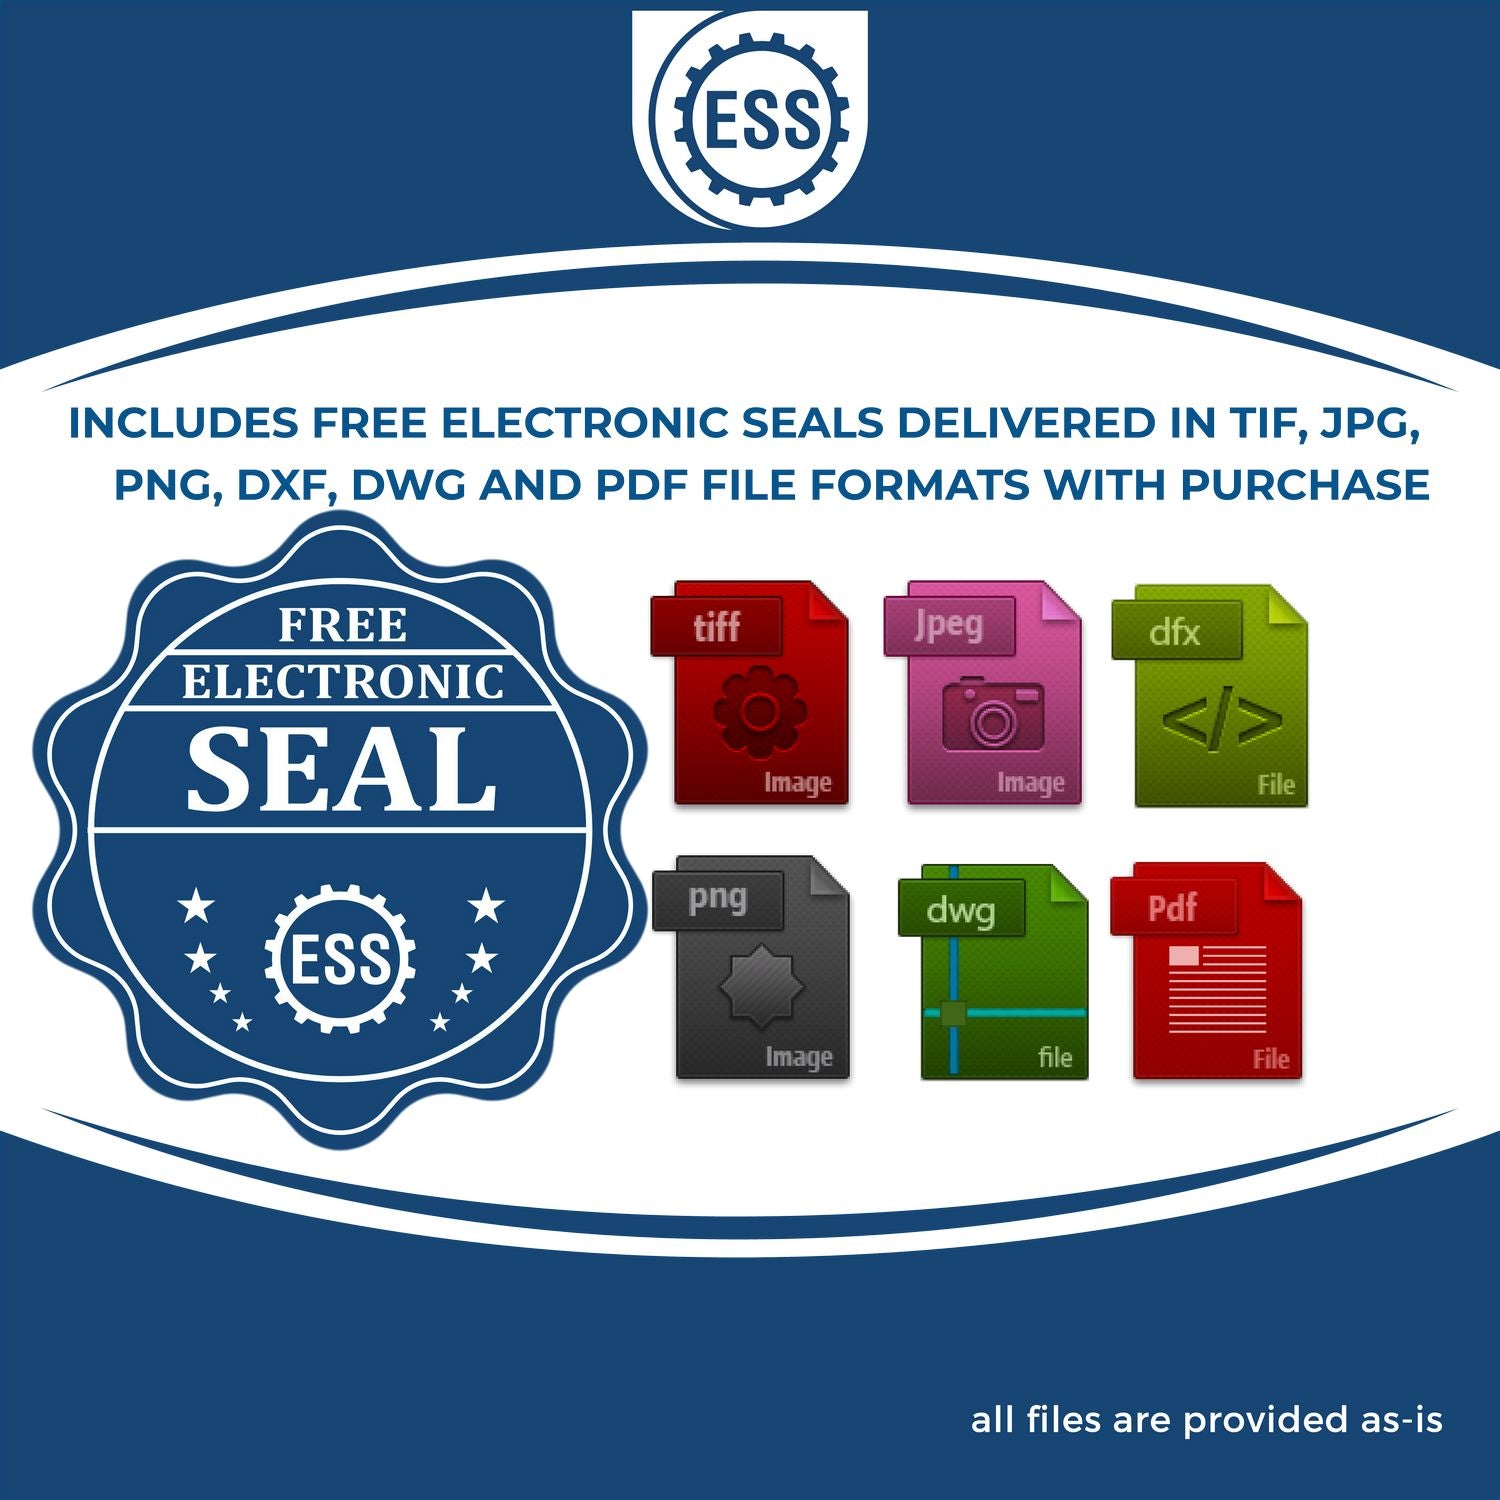 An infographic for the free electronic seal for the Hybrid Alabama Architect Seal illustrating the different file type icons such as DXF, DWG, TIF, JPG and PNG.